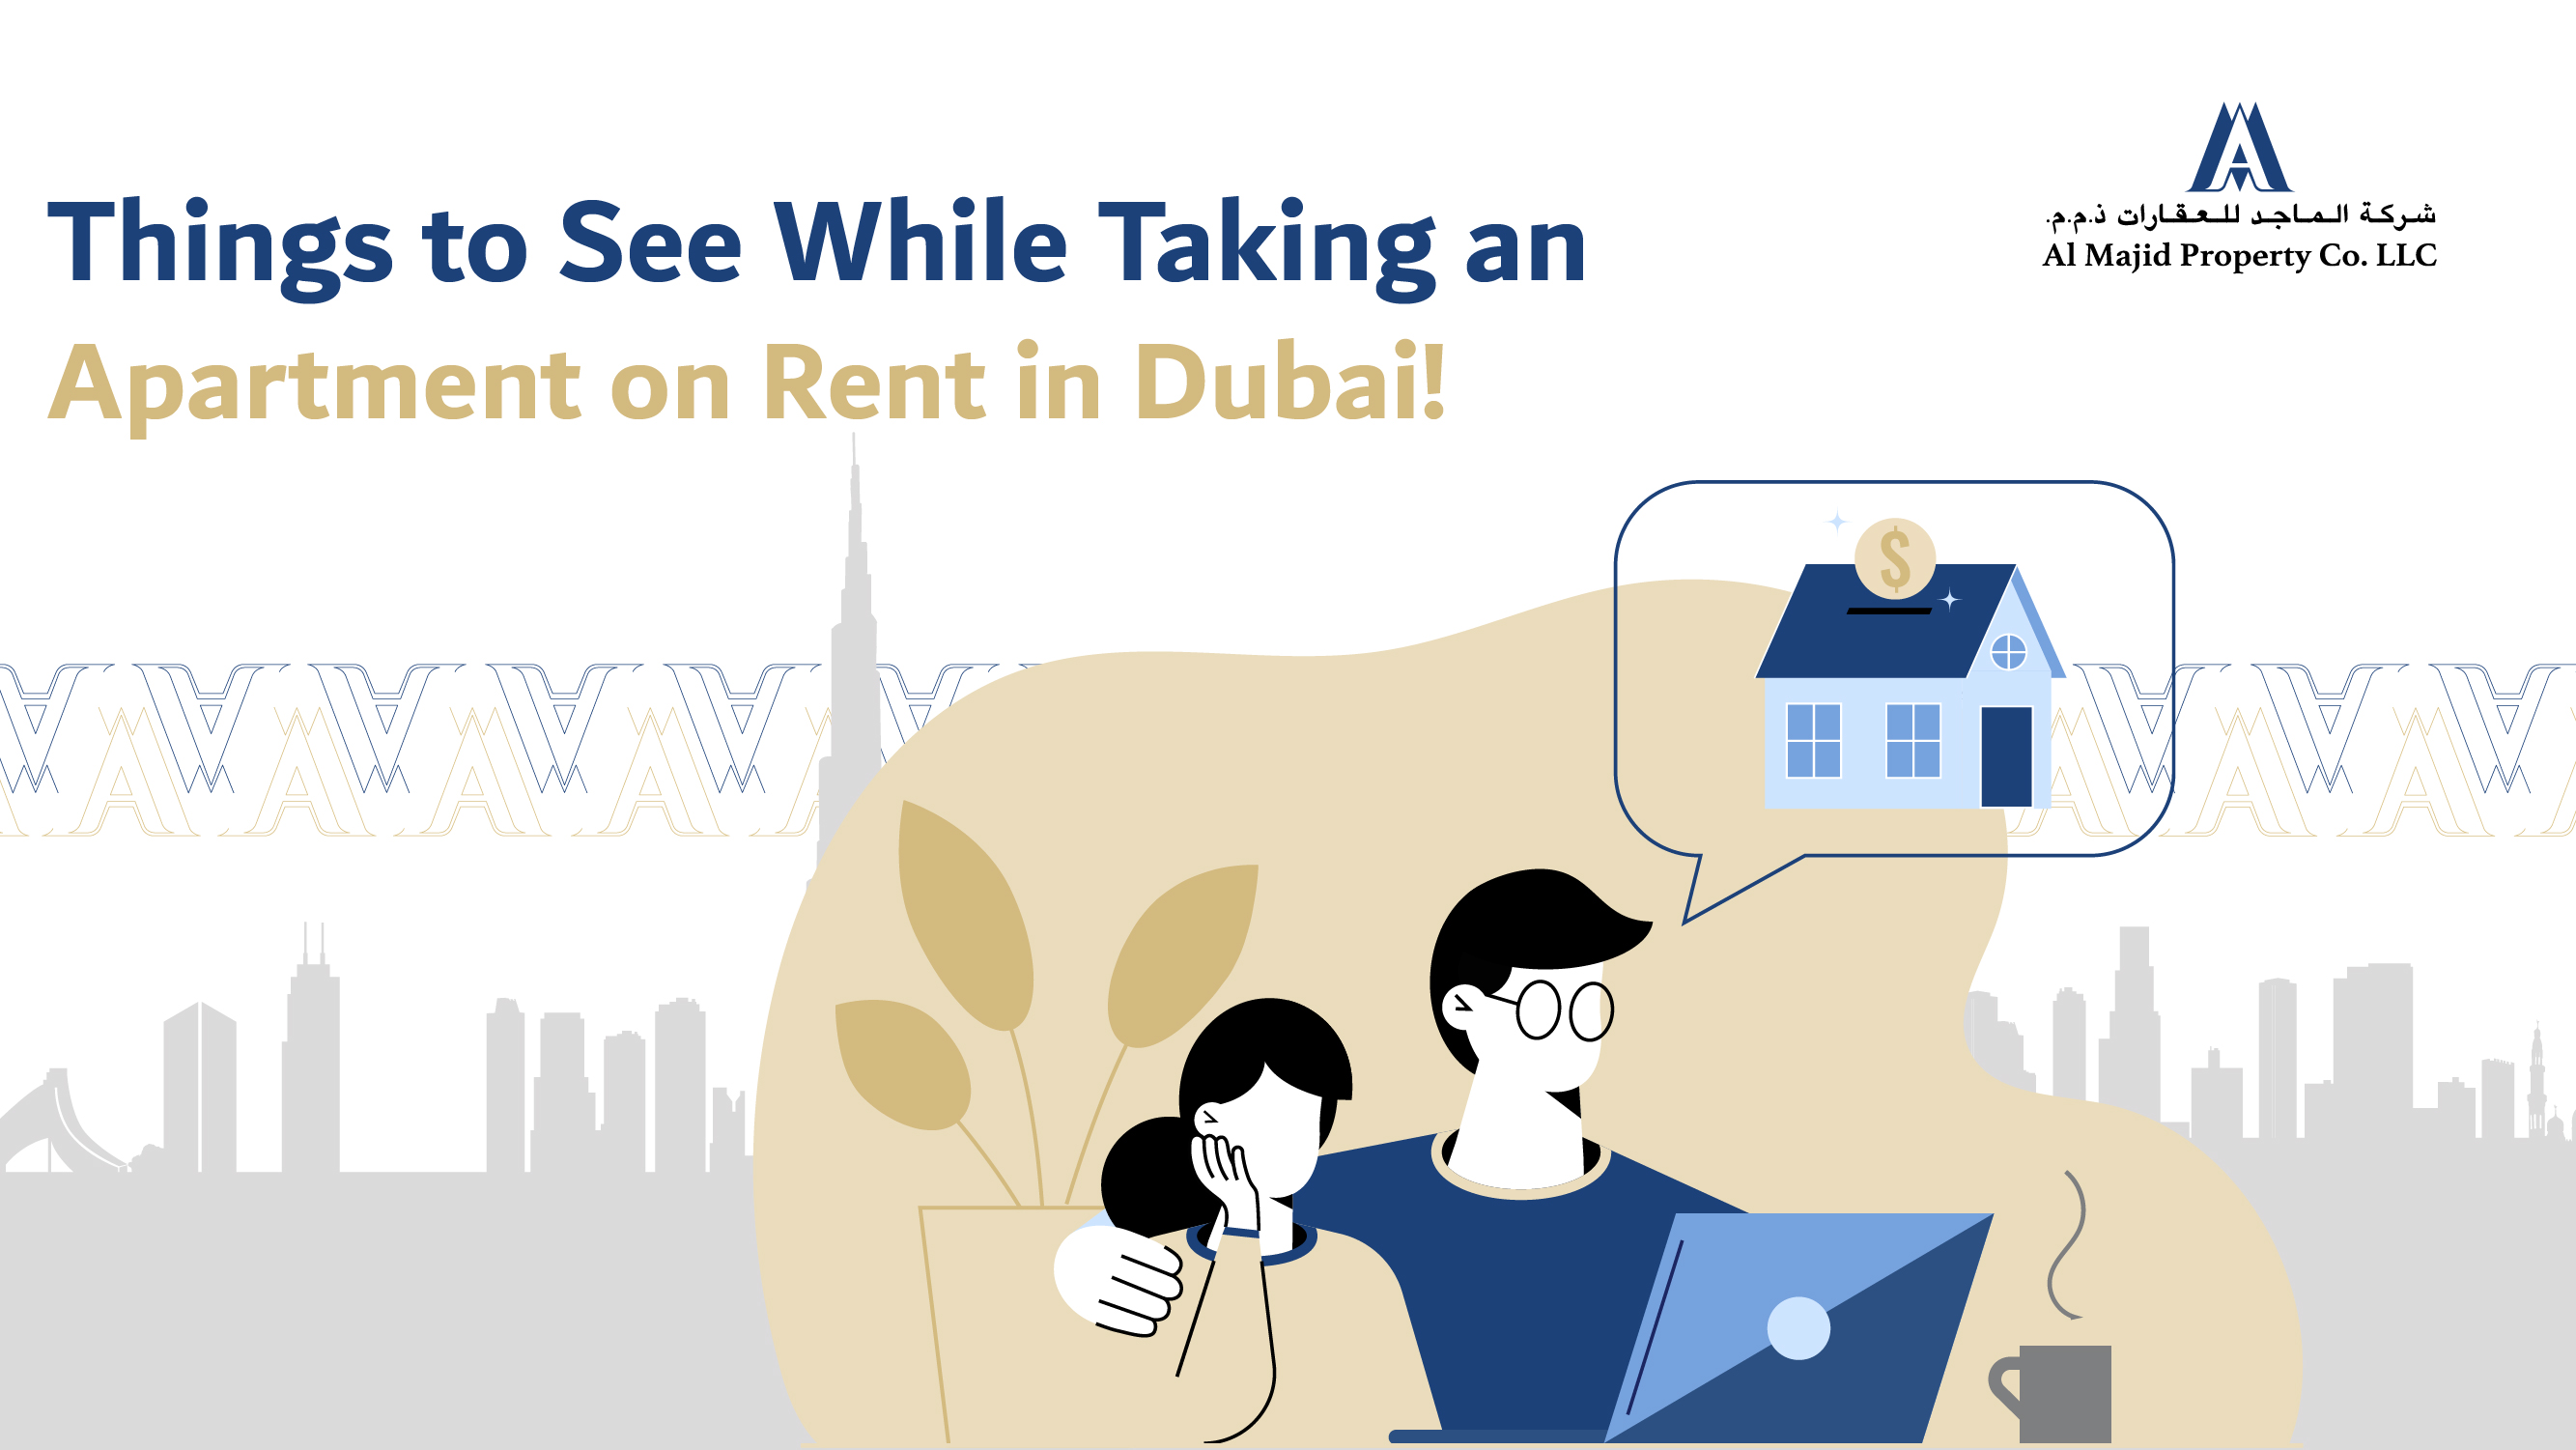 Things to See While Taking an Apartment on Rent in Dubai!